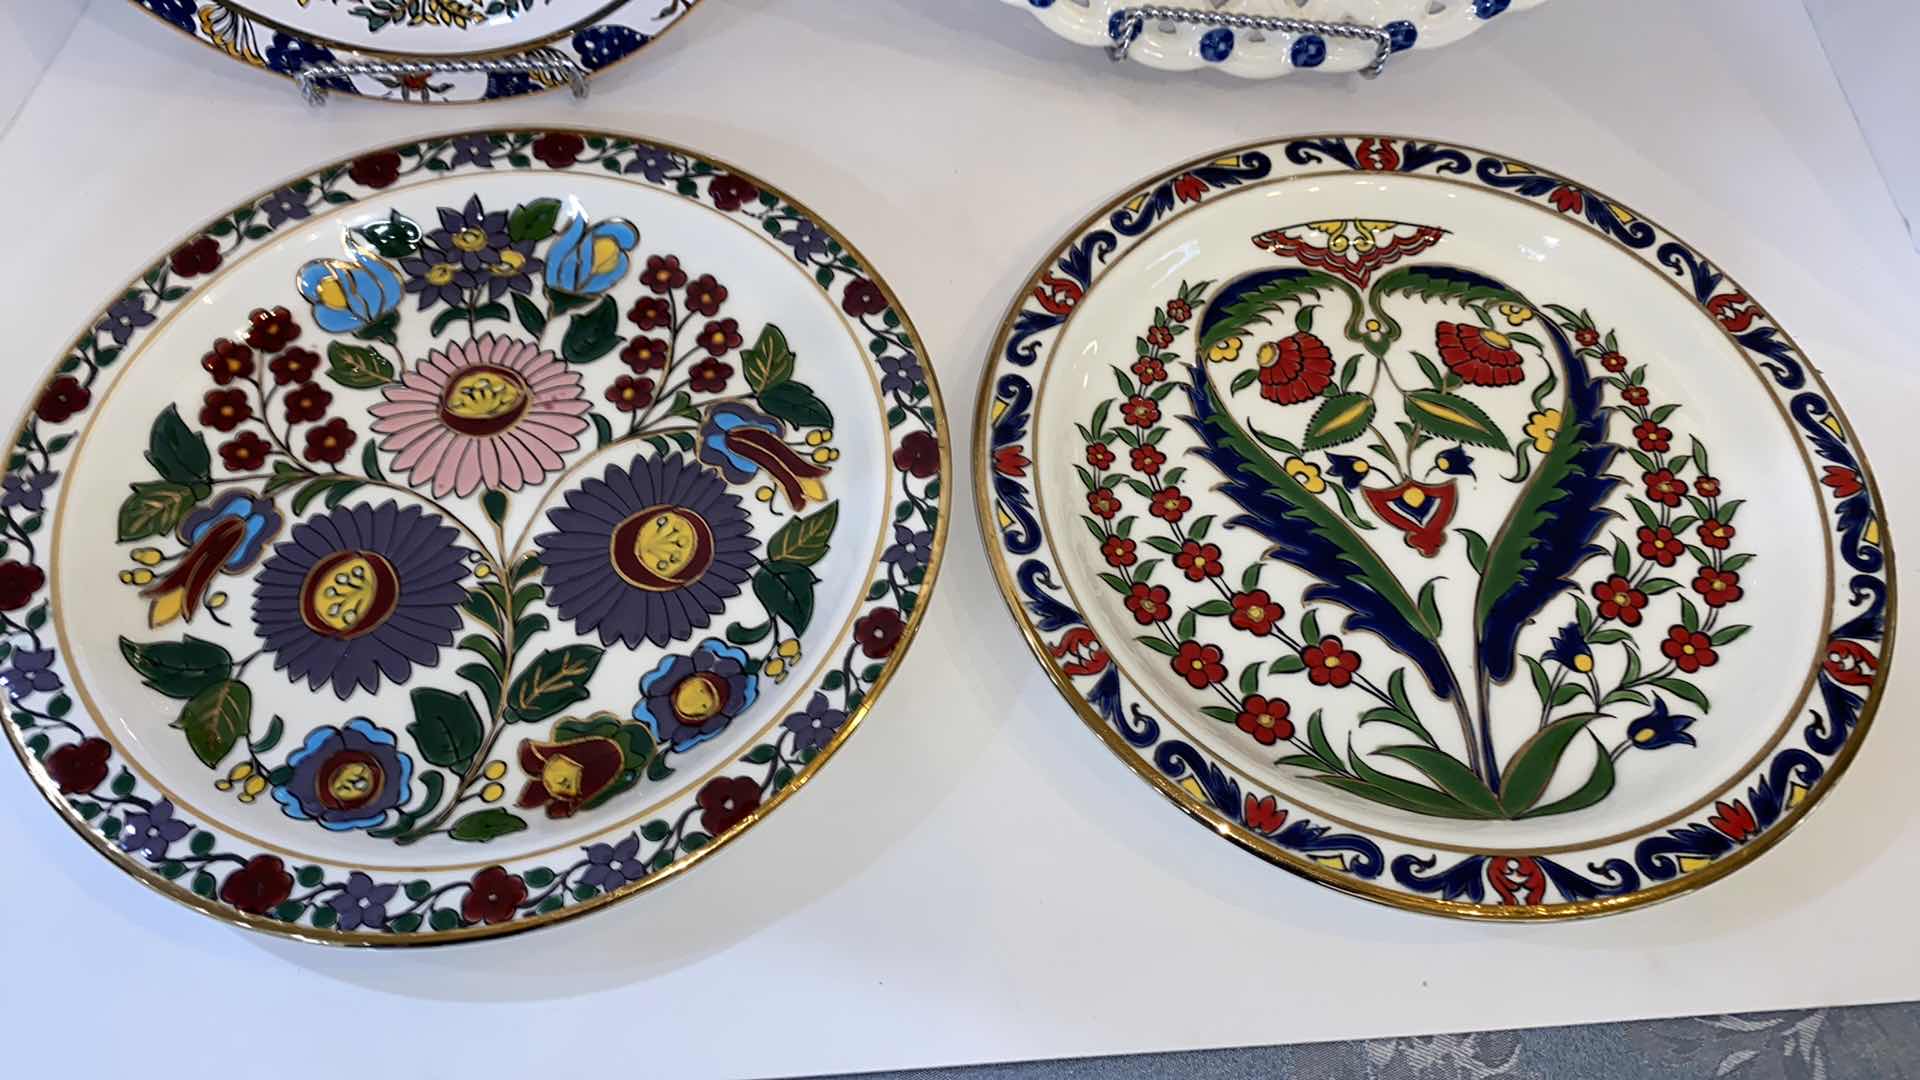 Photo 2 of 3 GOLD RIMMED FLORAL CERAMICA MADE IN GREECE PLATES 10” AND 1 PEACOCK PLATTER NOT MARKED 13”